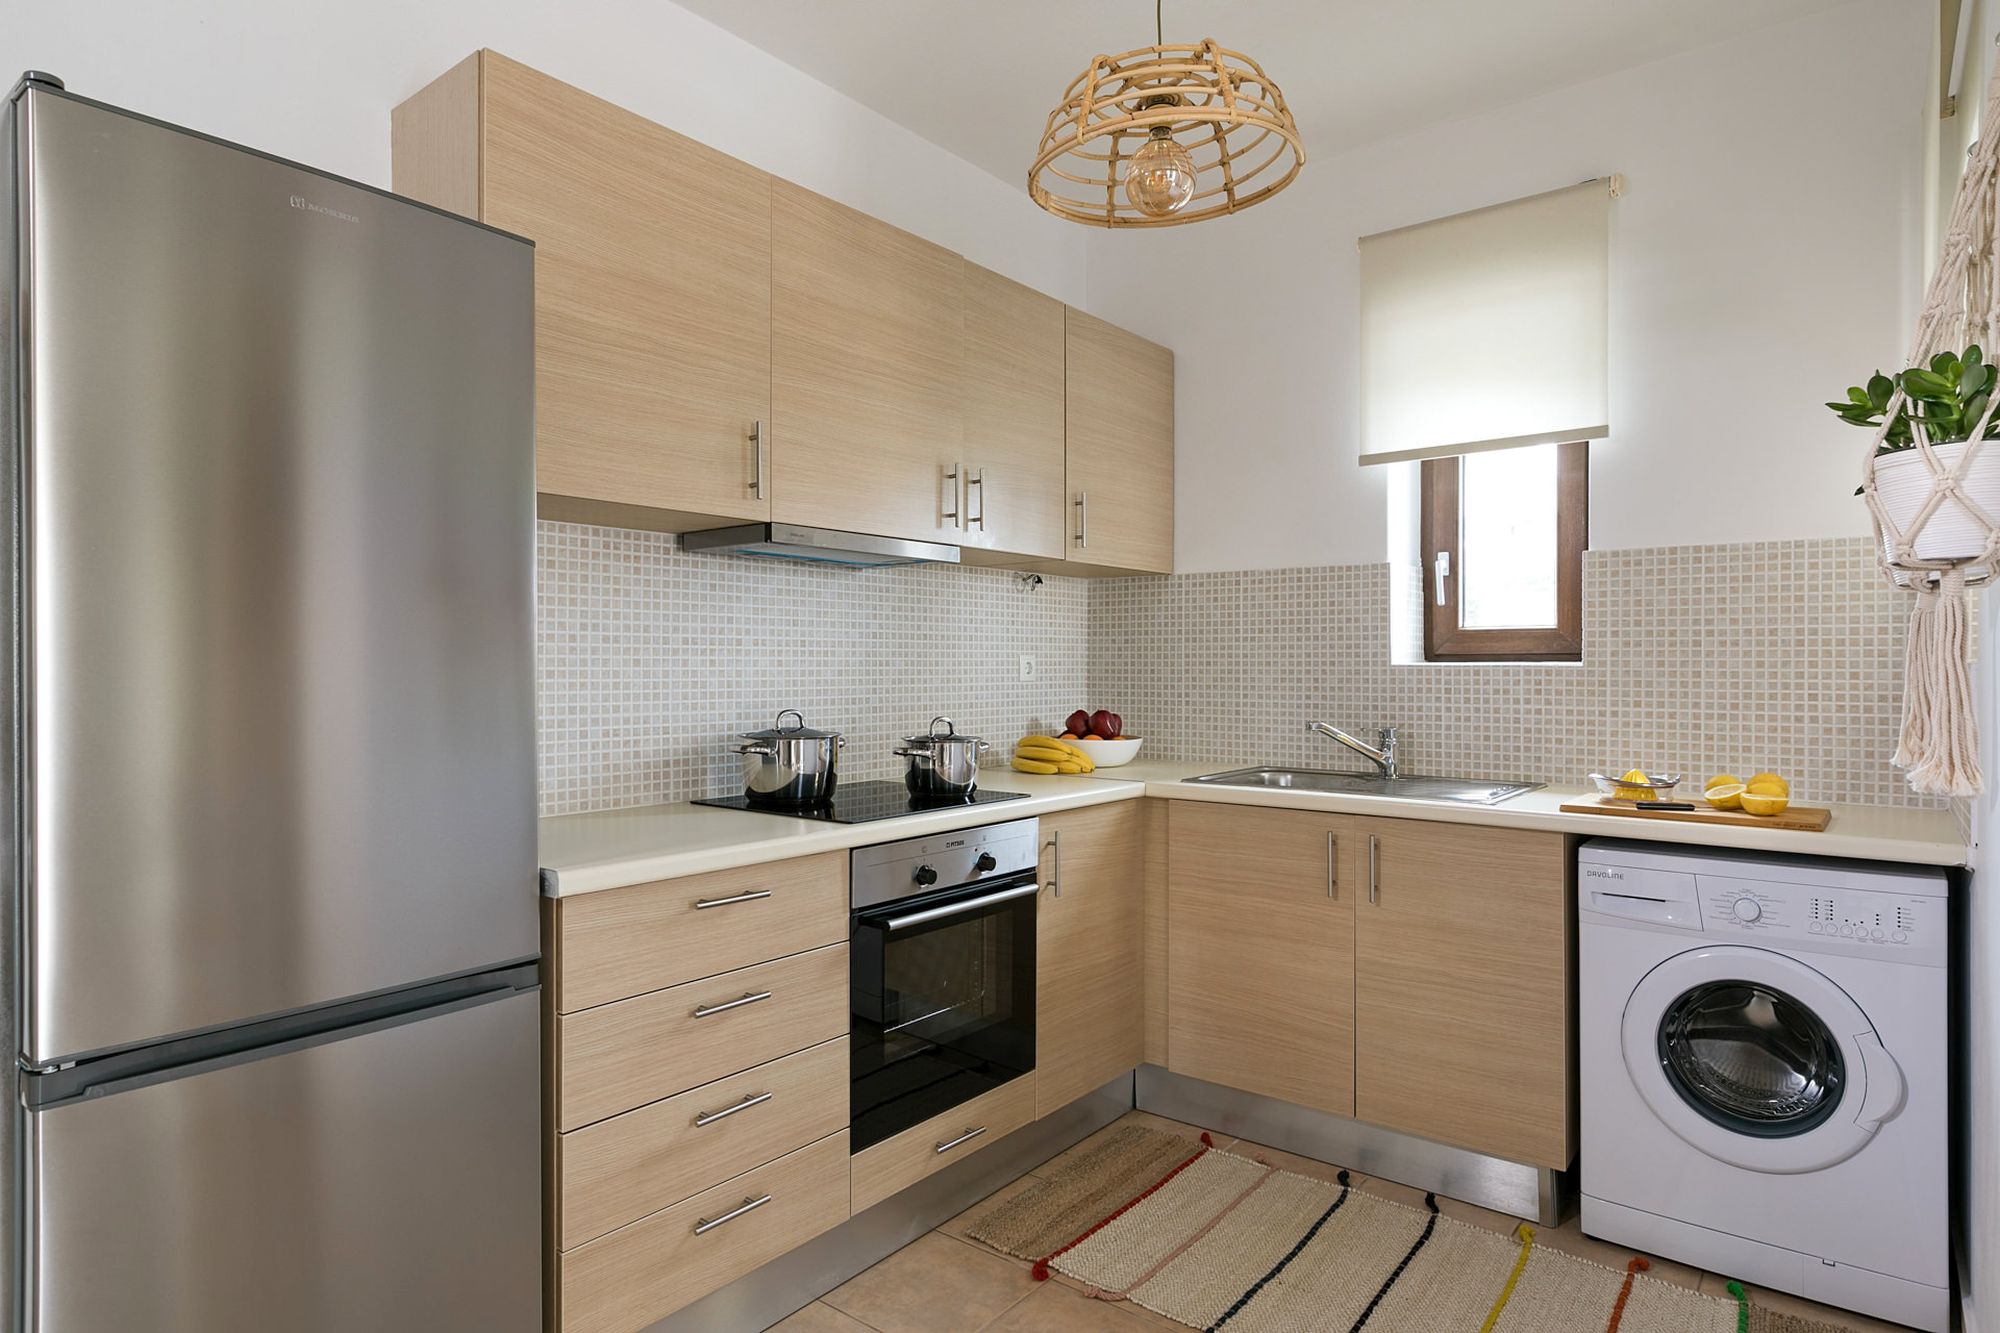 Modern kitchen with beige cabinets, a big inox fridge, an electric cooker oven and a washing machine.